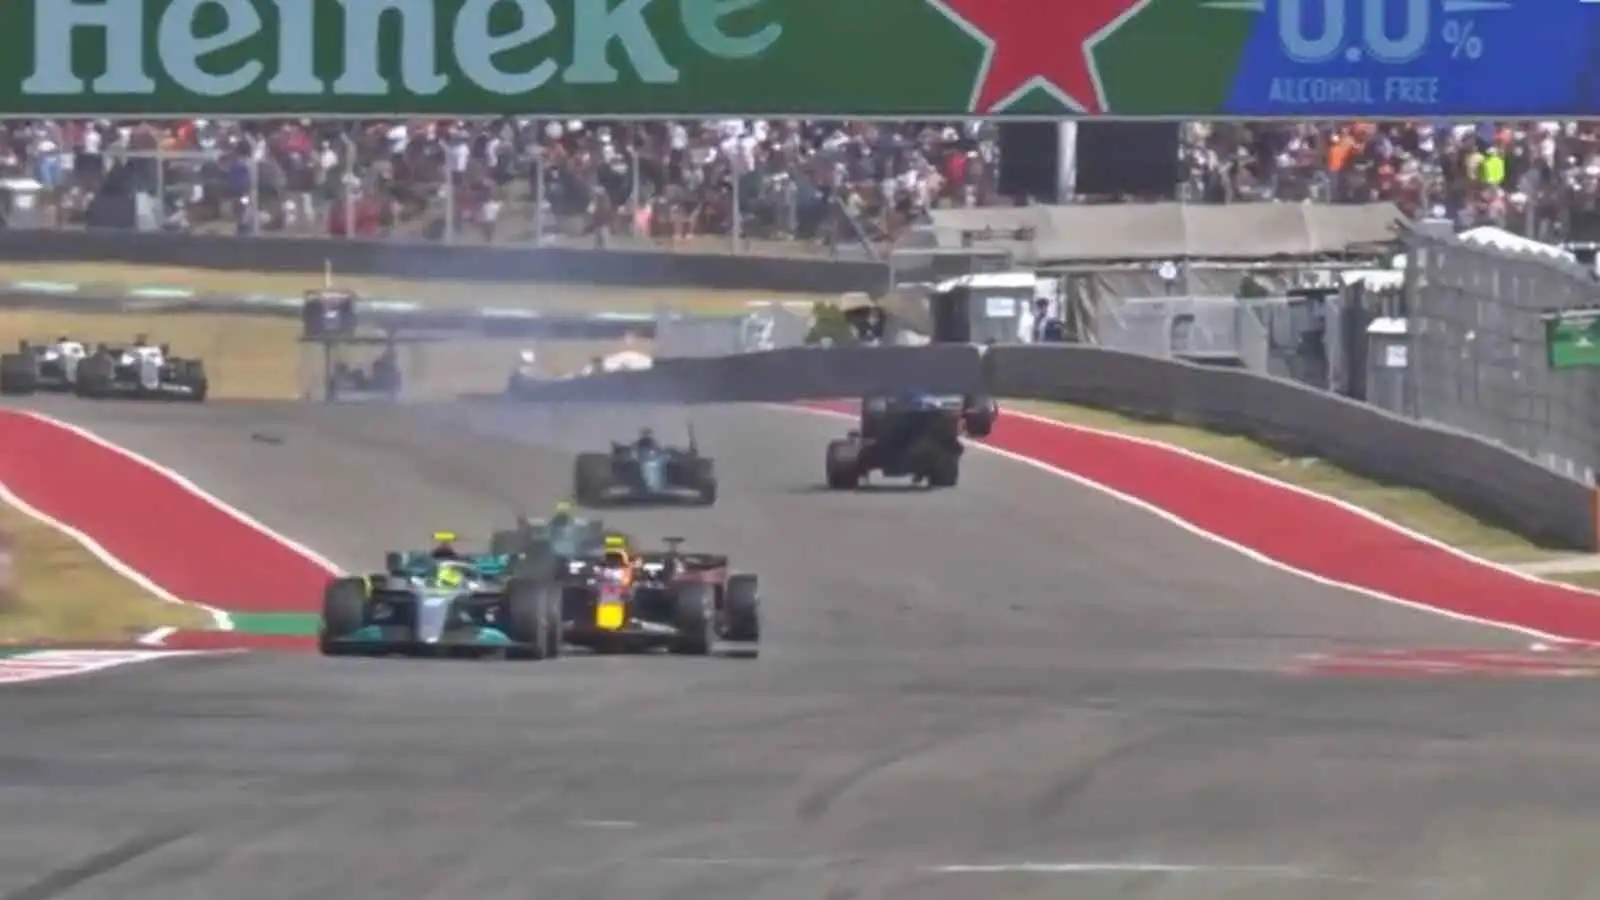 Fernando Alonso hits Lance Stroll in scary high-speed US Grand Prix ...